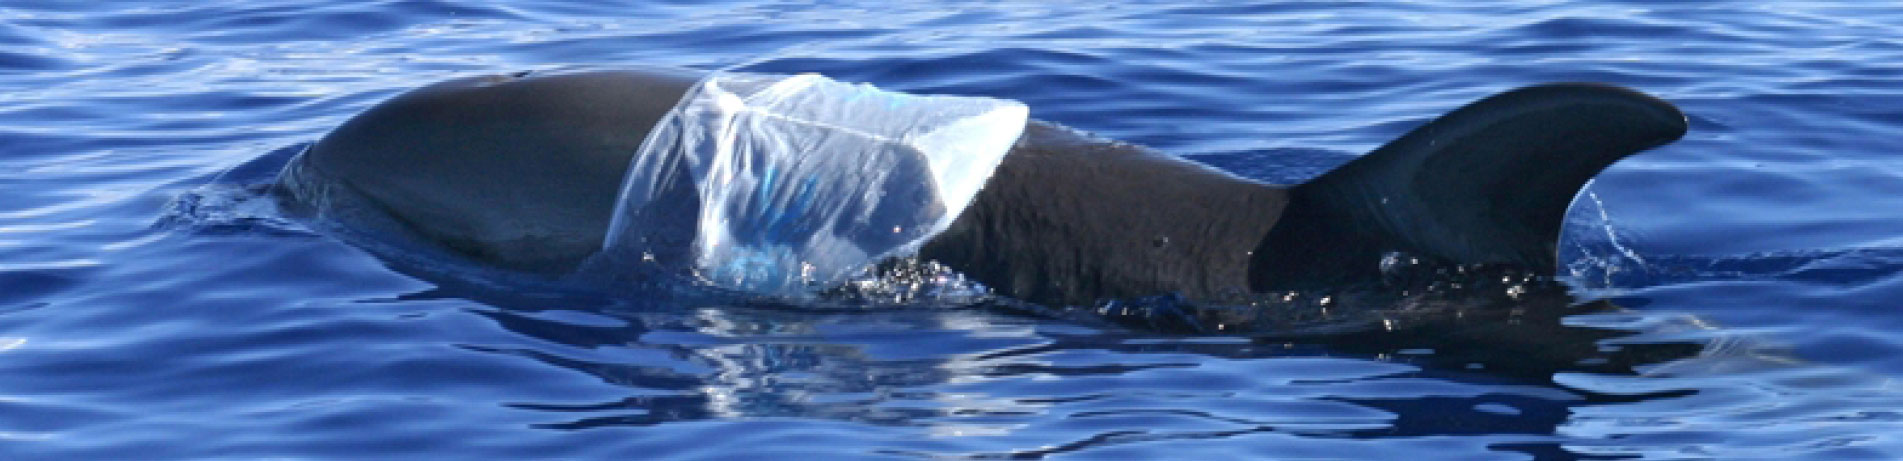 Dolphin with a plastic bag attached to its body